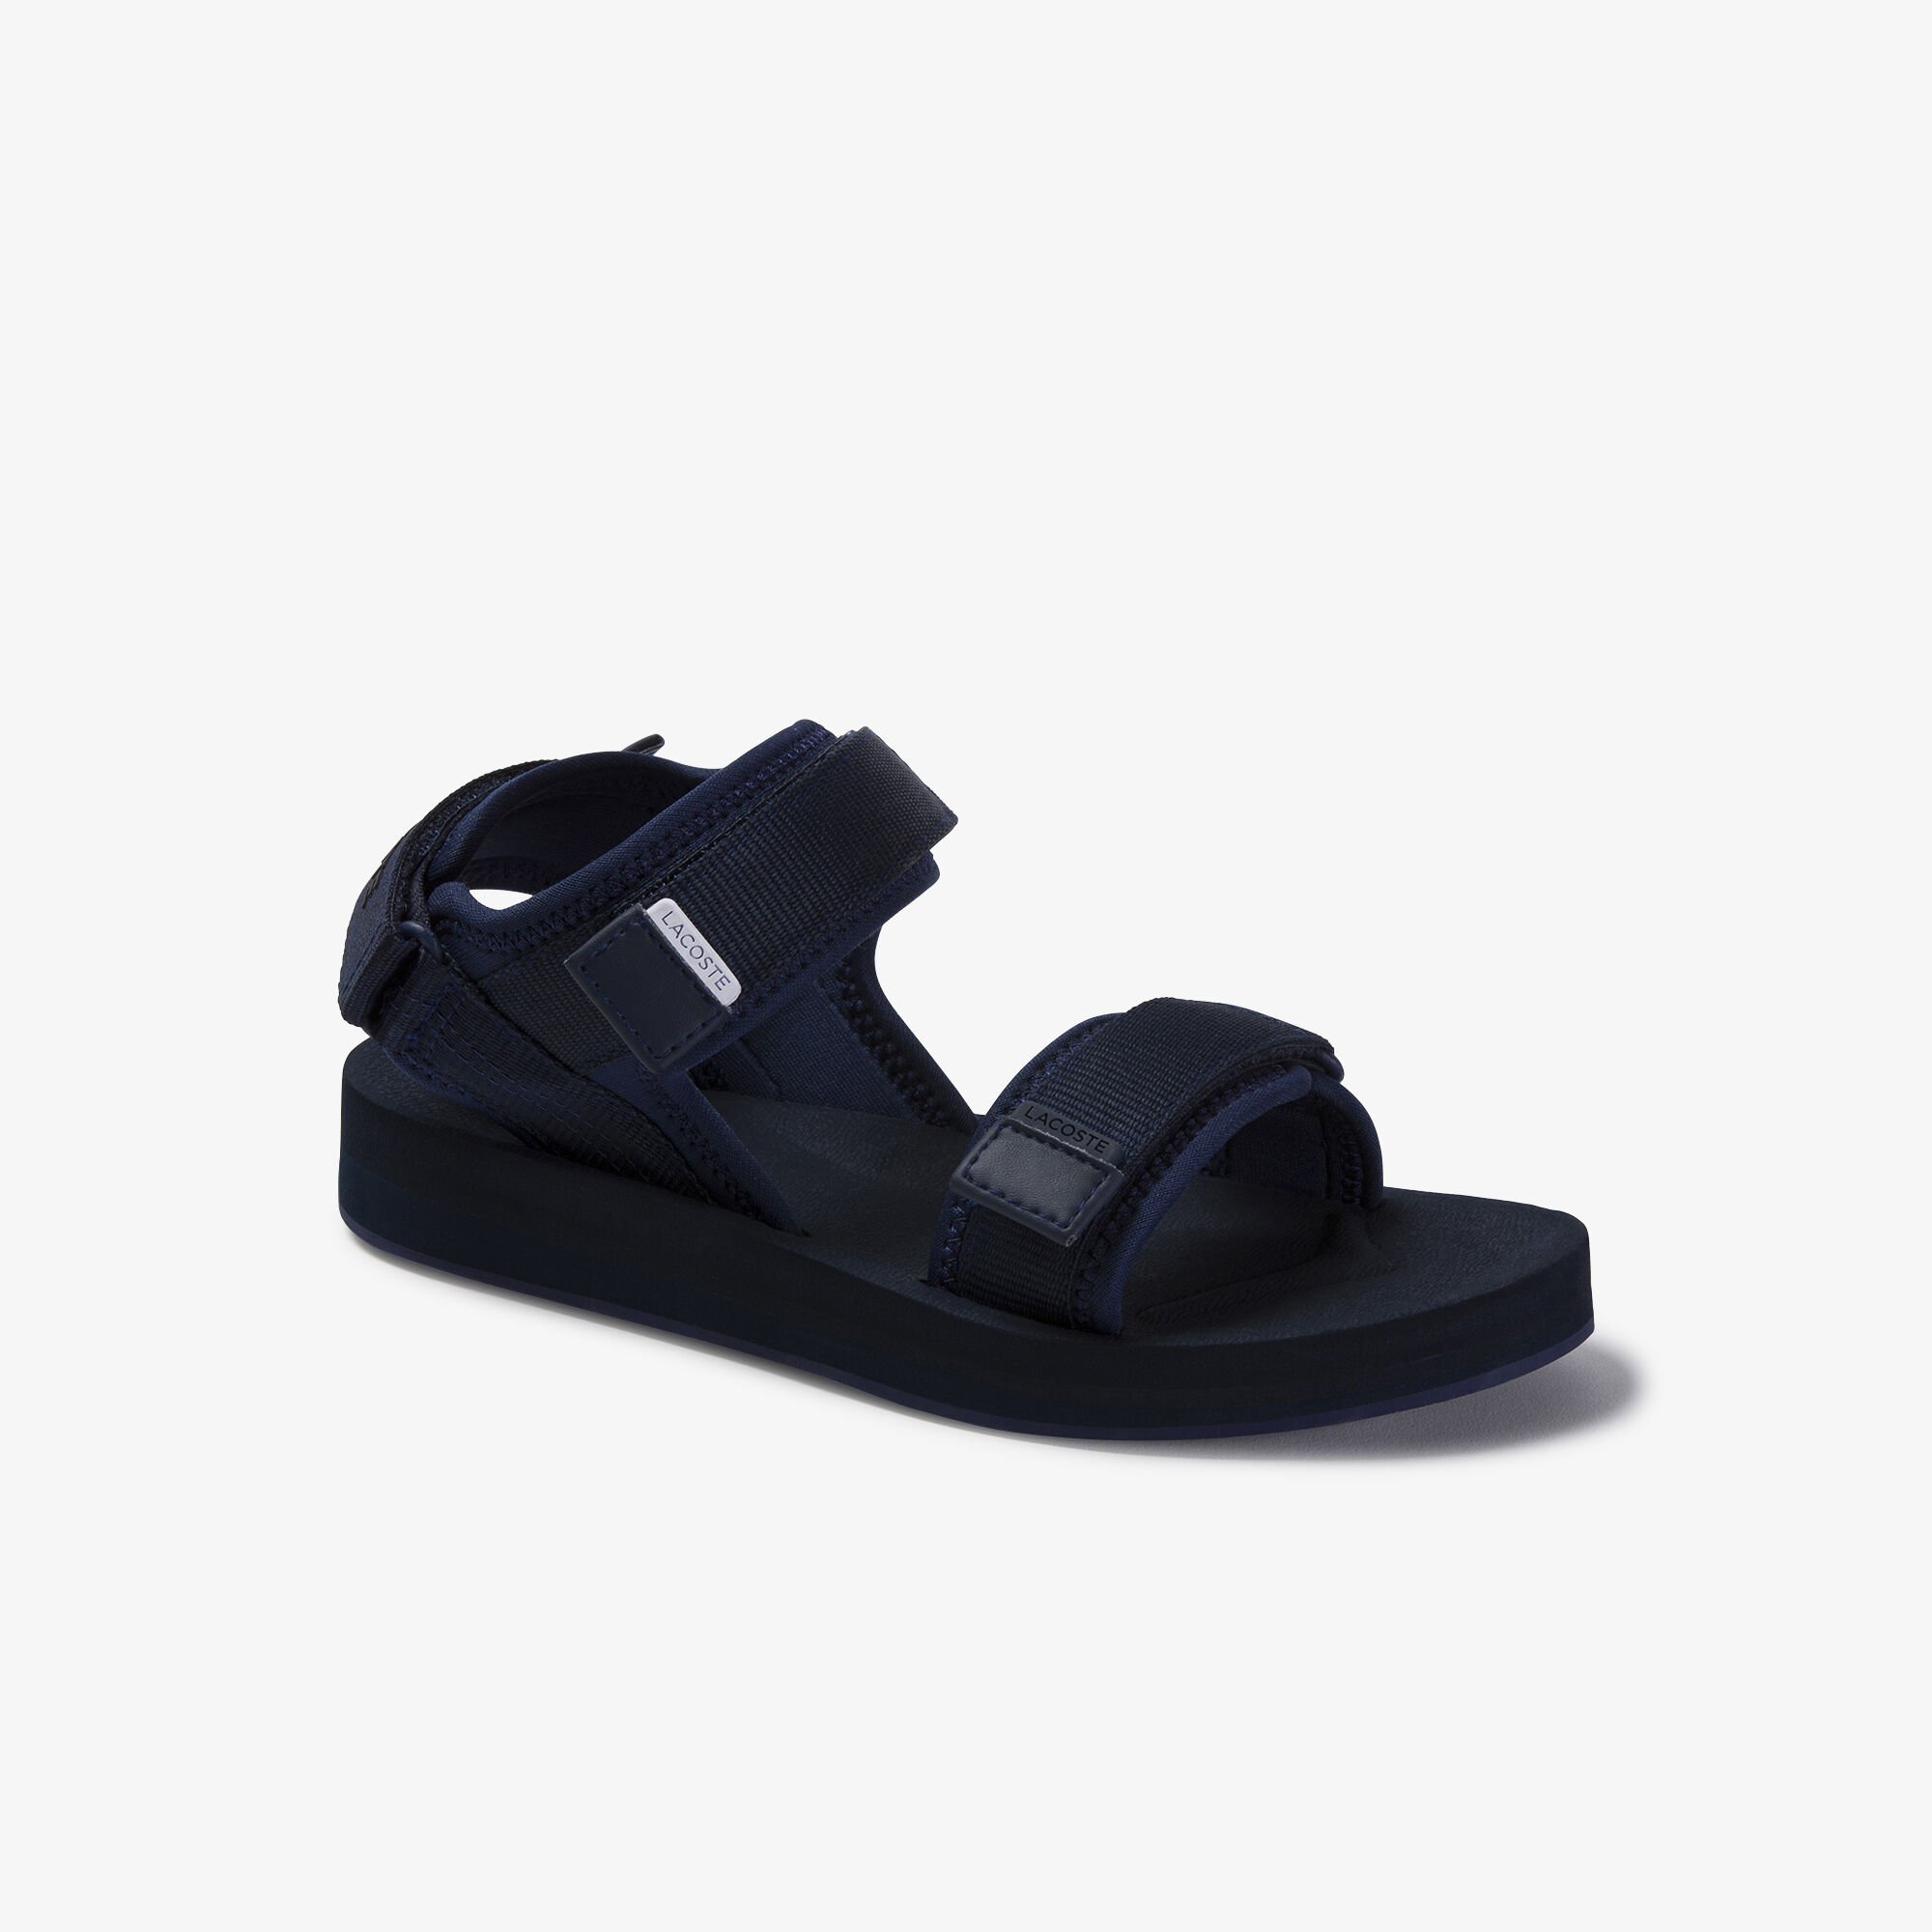 Women's Suruga Textile and Synthetic Sandals